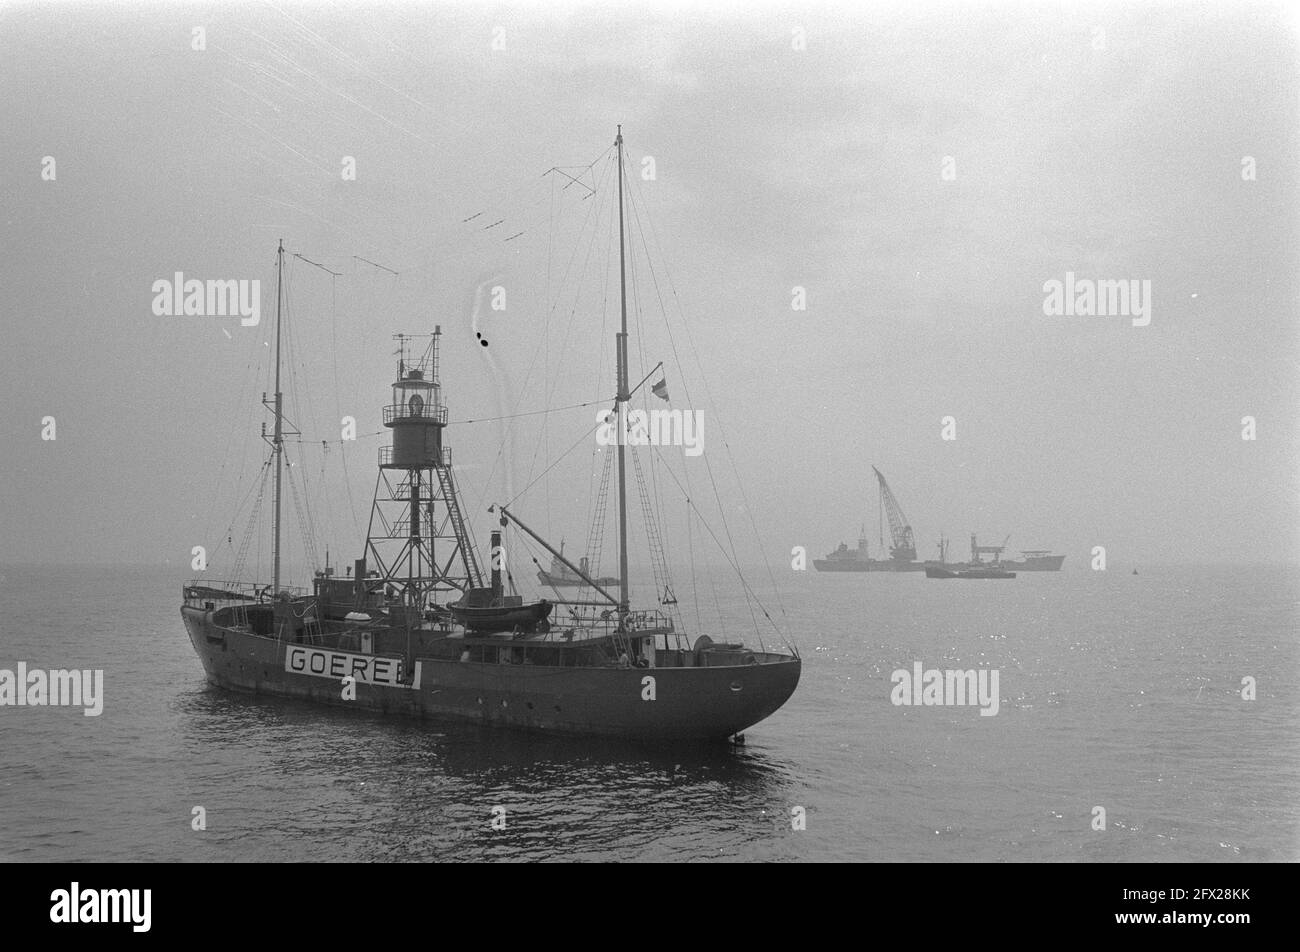 Goeree lighting platform is placed at Hoek van Holland instead of lightvessel Goeree, in foreground lightvessel Goeree on background light platform, July 22, 1971, light platforms, lightships, The Netherlands, 20th century press agency photo, news to remember, documentary, historic photography 1945-1990, visual stories, human history of the Twentieth Century, capturing moments in time Stock Photo